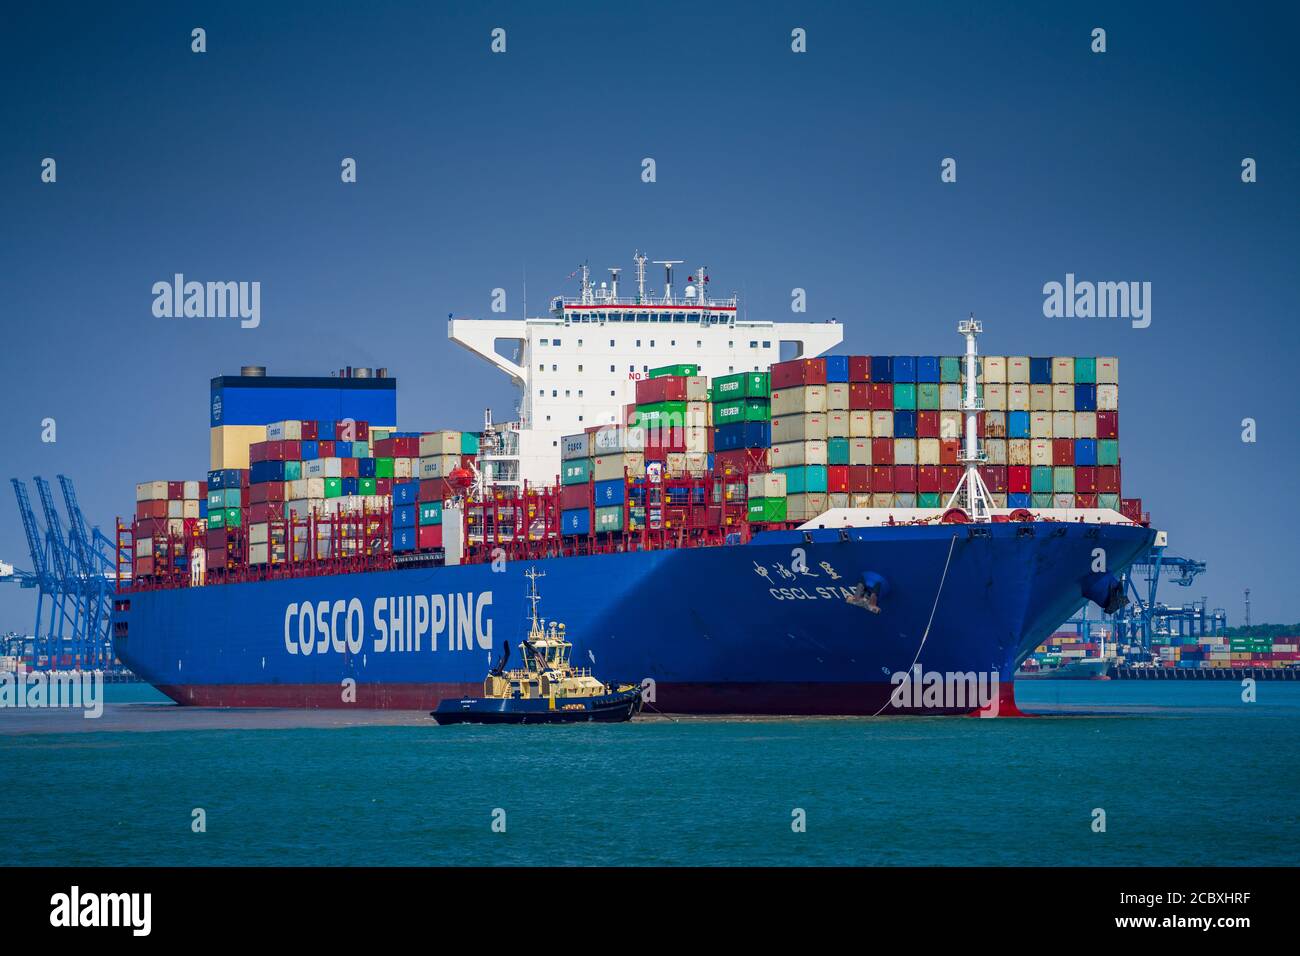 Cosco Shipping Container Ship enters Felixstowe Port - The Cosco Shipping vessel the CSCL Star approaches the docks at Felixstowe Port, in the UK. Stock Photo